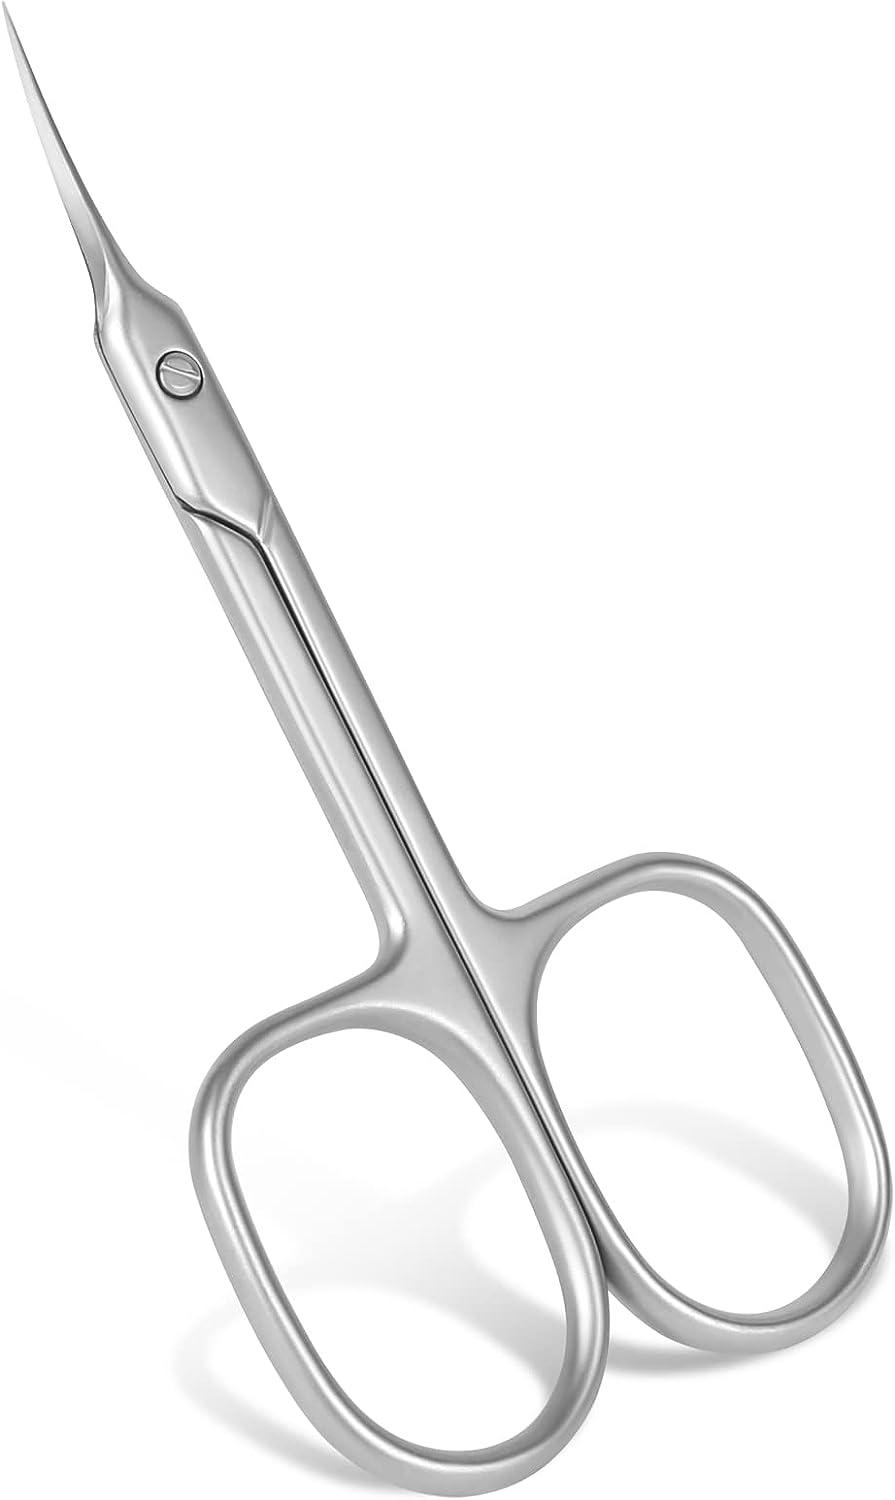 Compact Mini Scissors with Round Handles - Ideal for Precision